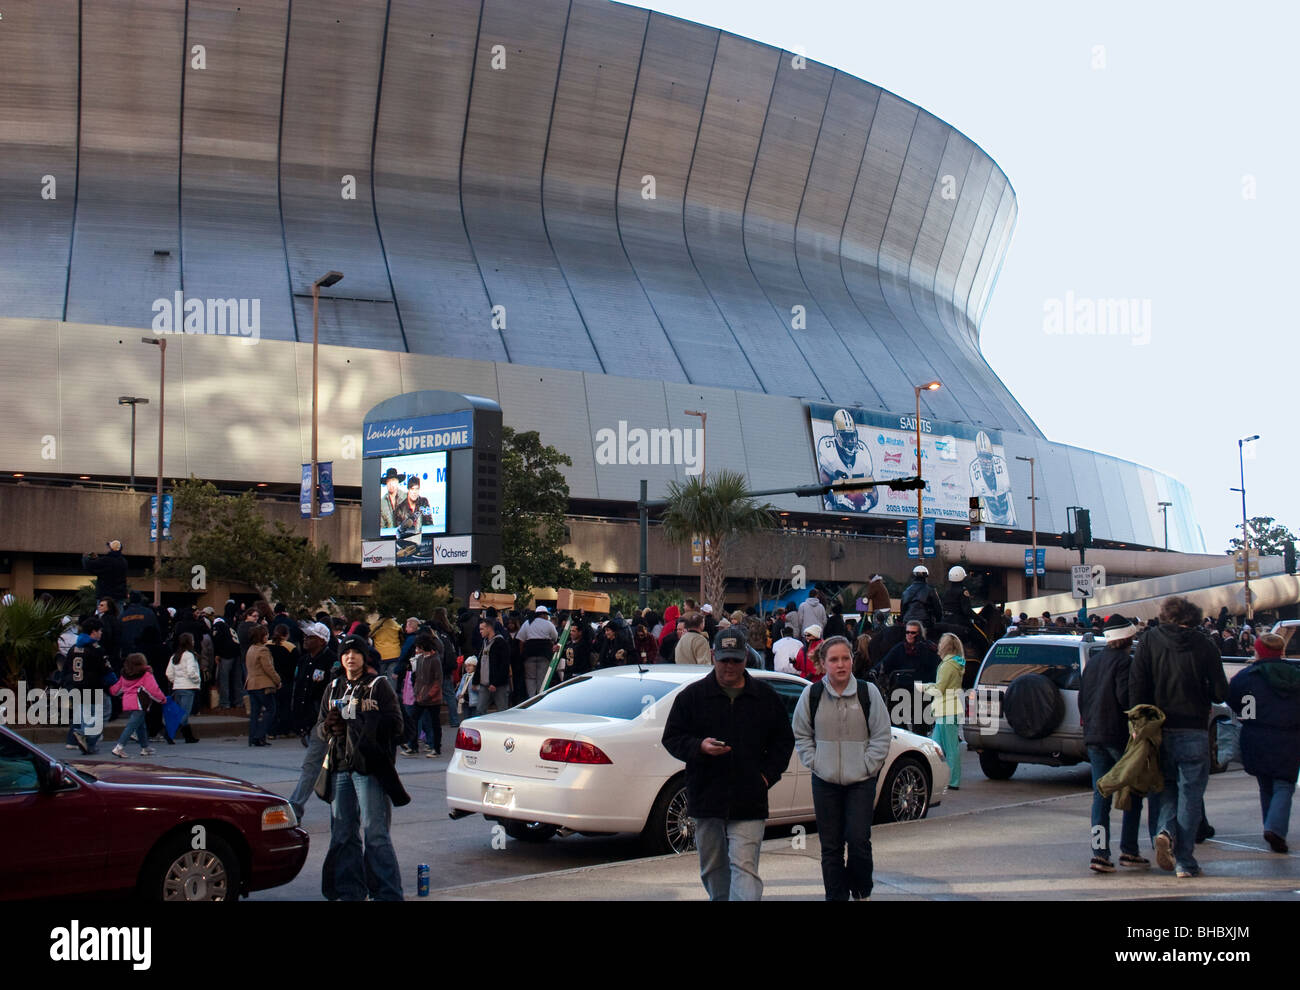 Saints fans milling about the Superdome before the Super Bowl XLIV Champions parade.  New Orleans, Feb. 9, 2010. Stock Photo